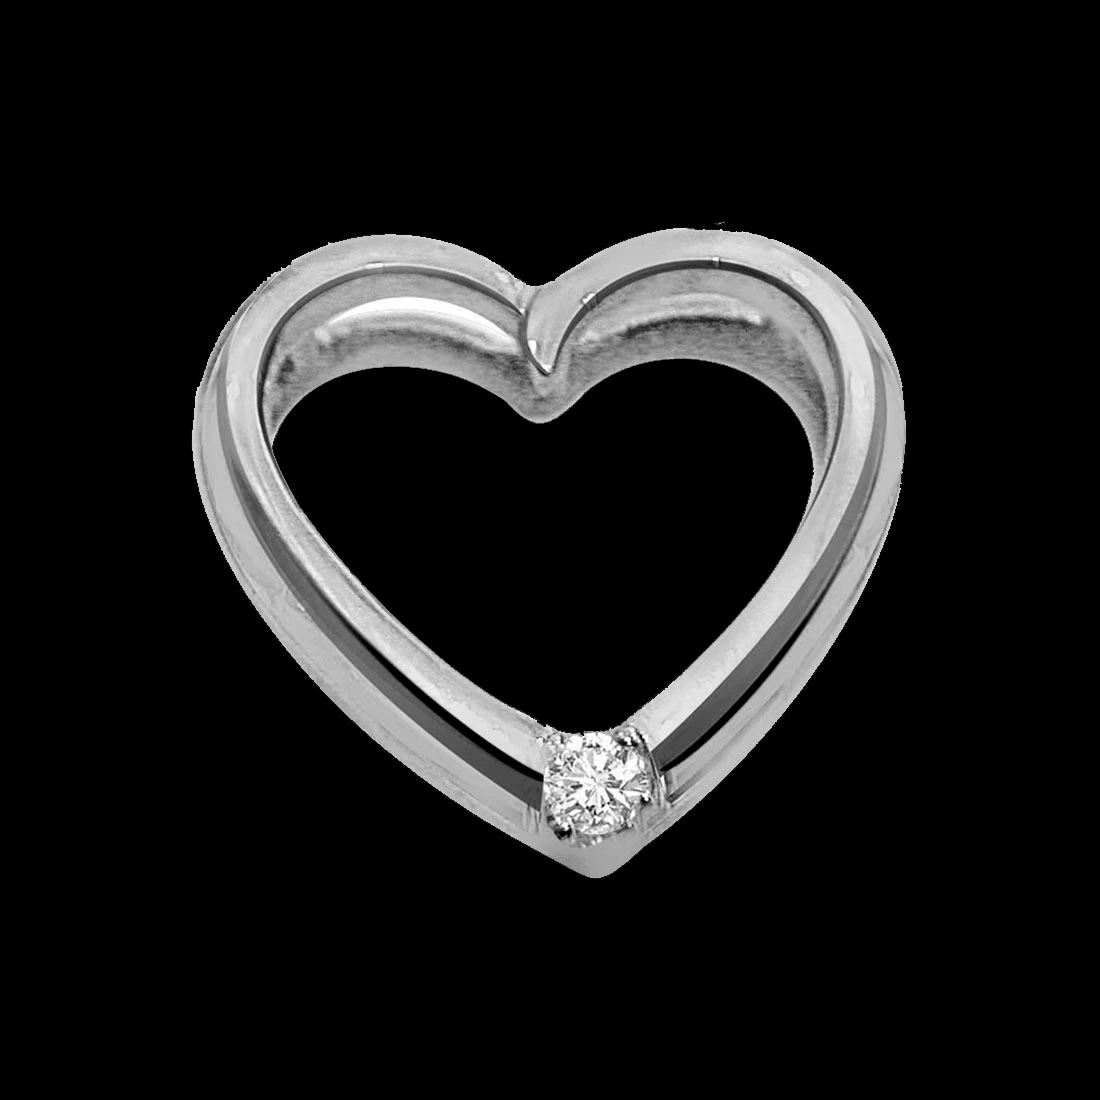 Queen of Heart - Real Diamond & Sterling Silver Pendant with 18 IN Chain (SDP107)